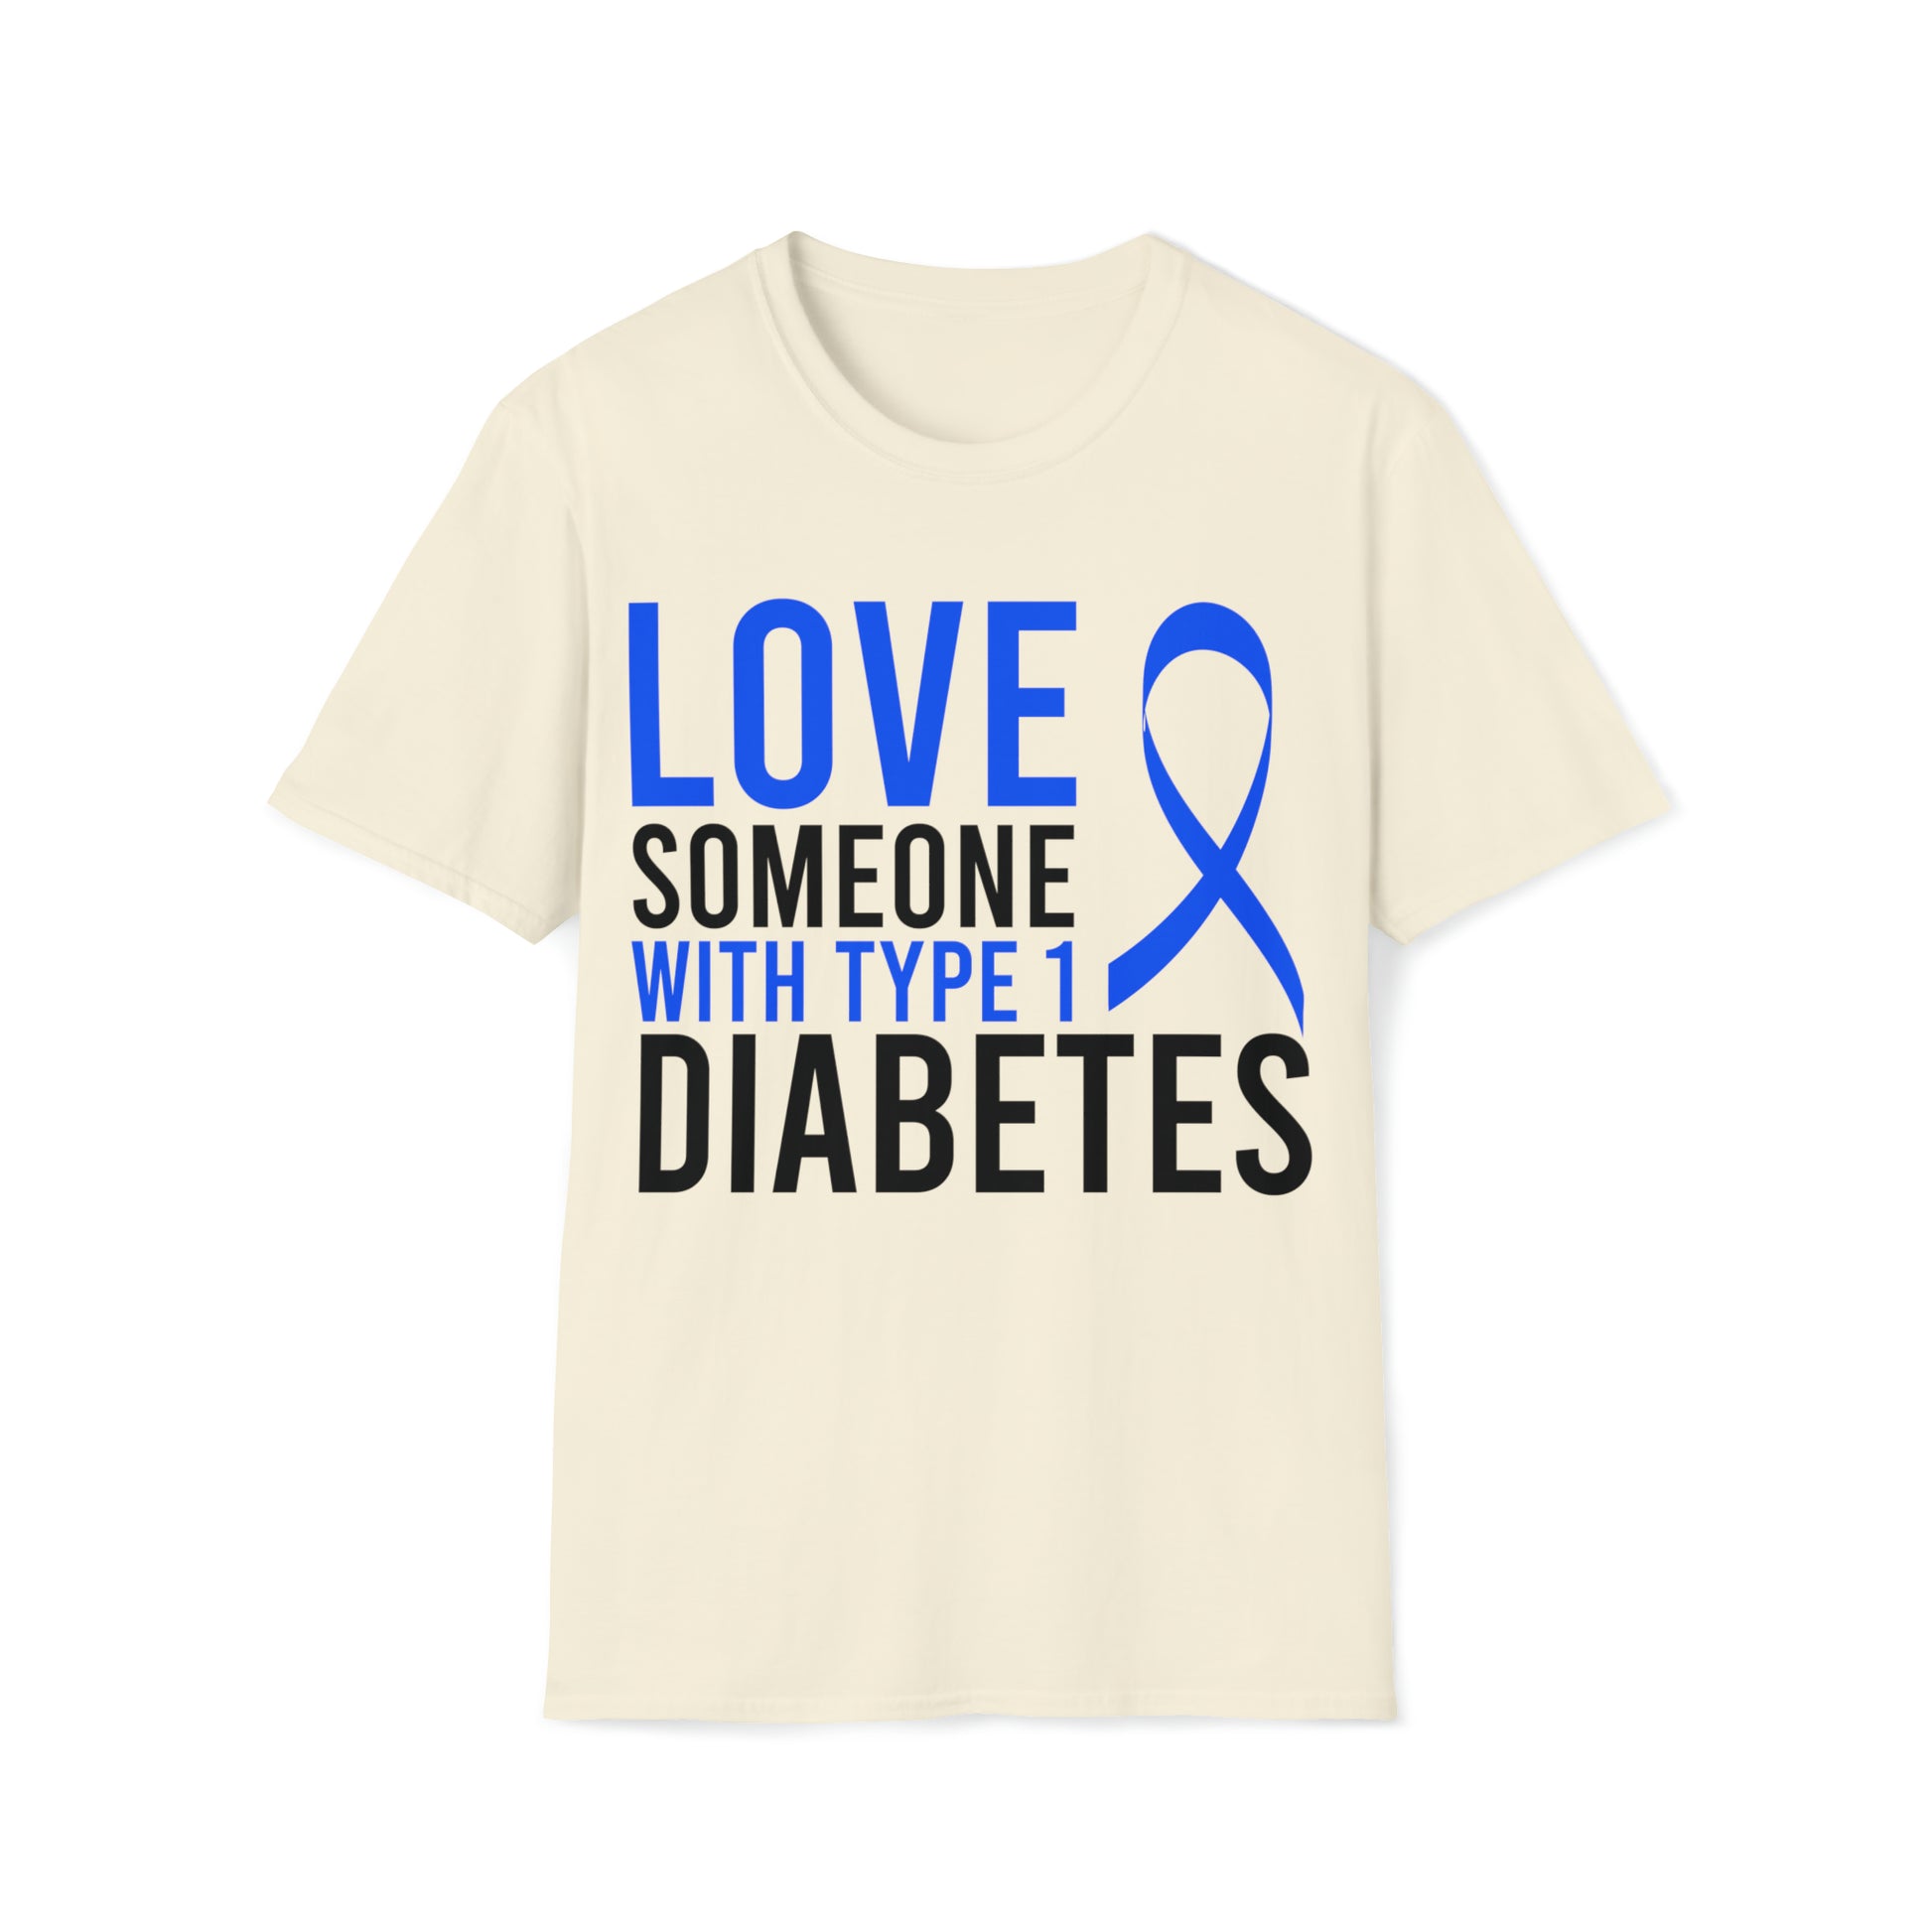 Love Someone with Type 1 Diabetes Shirt